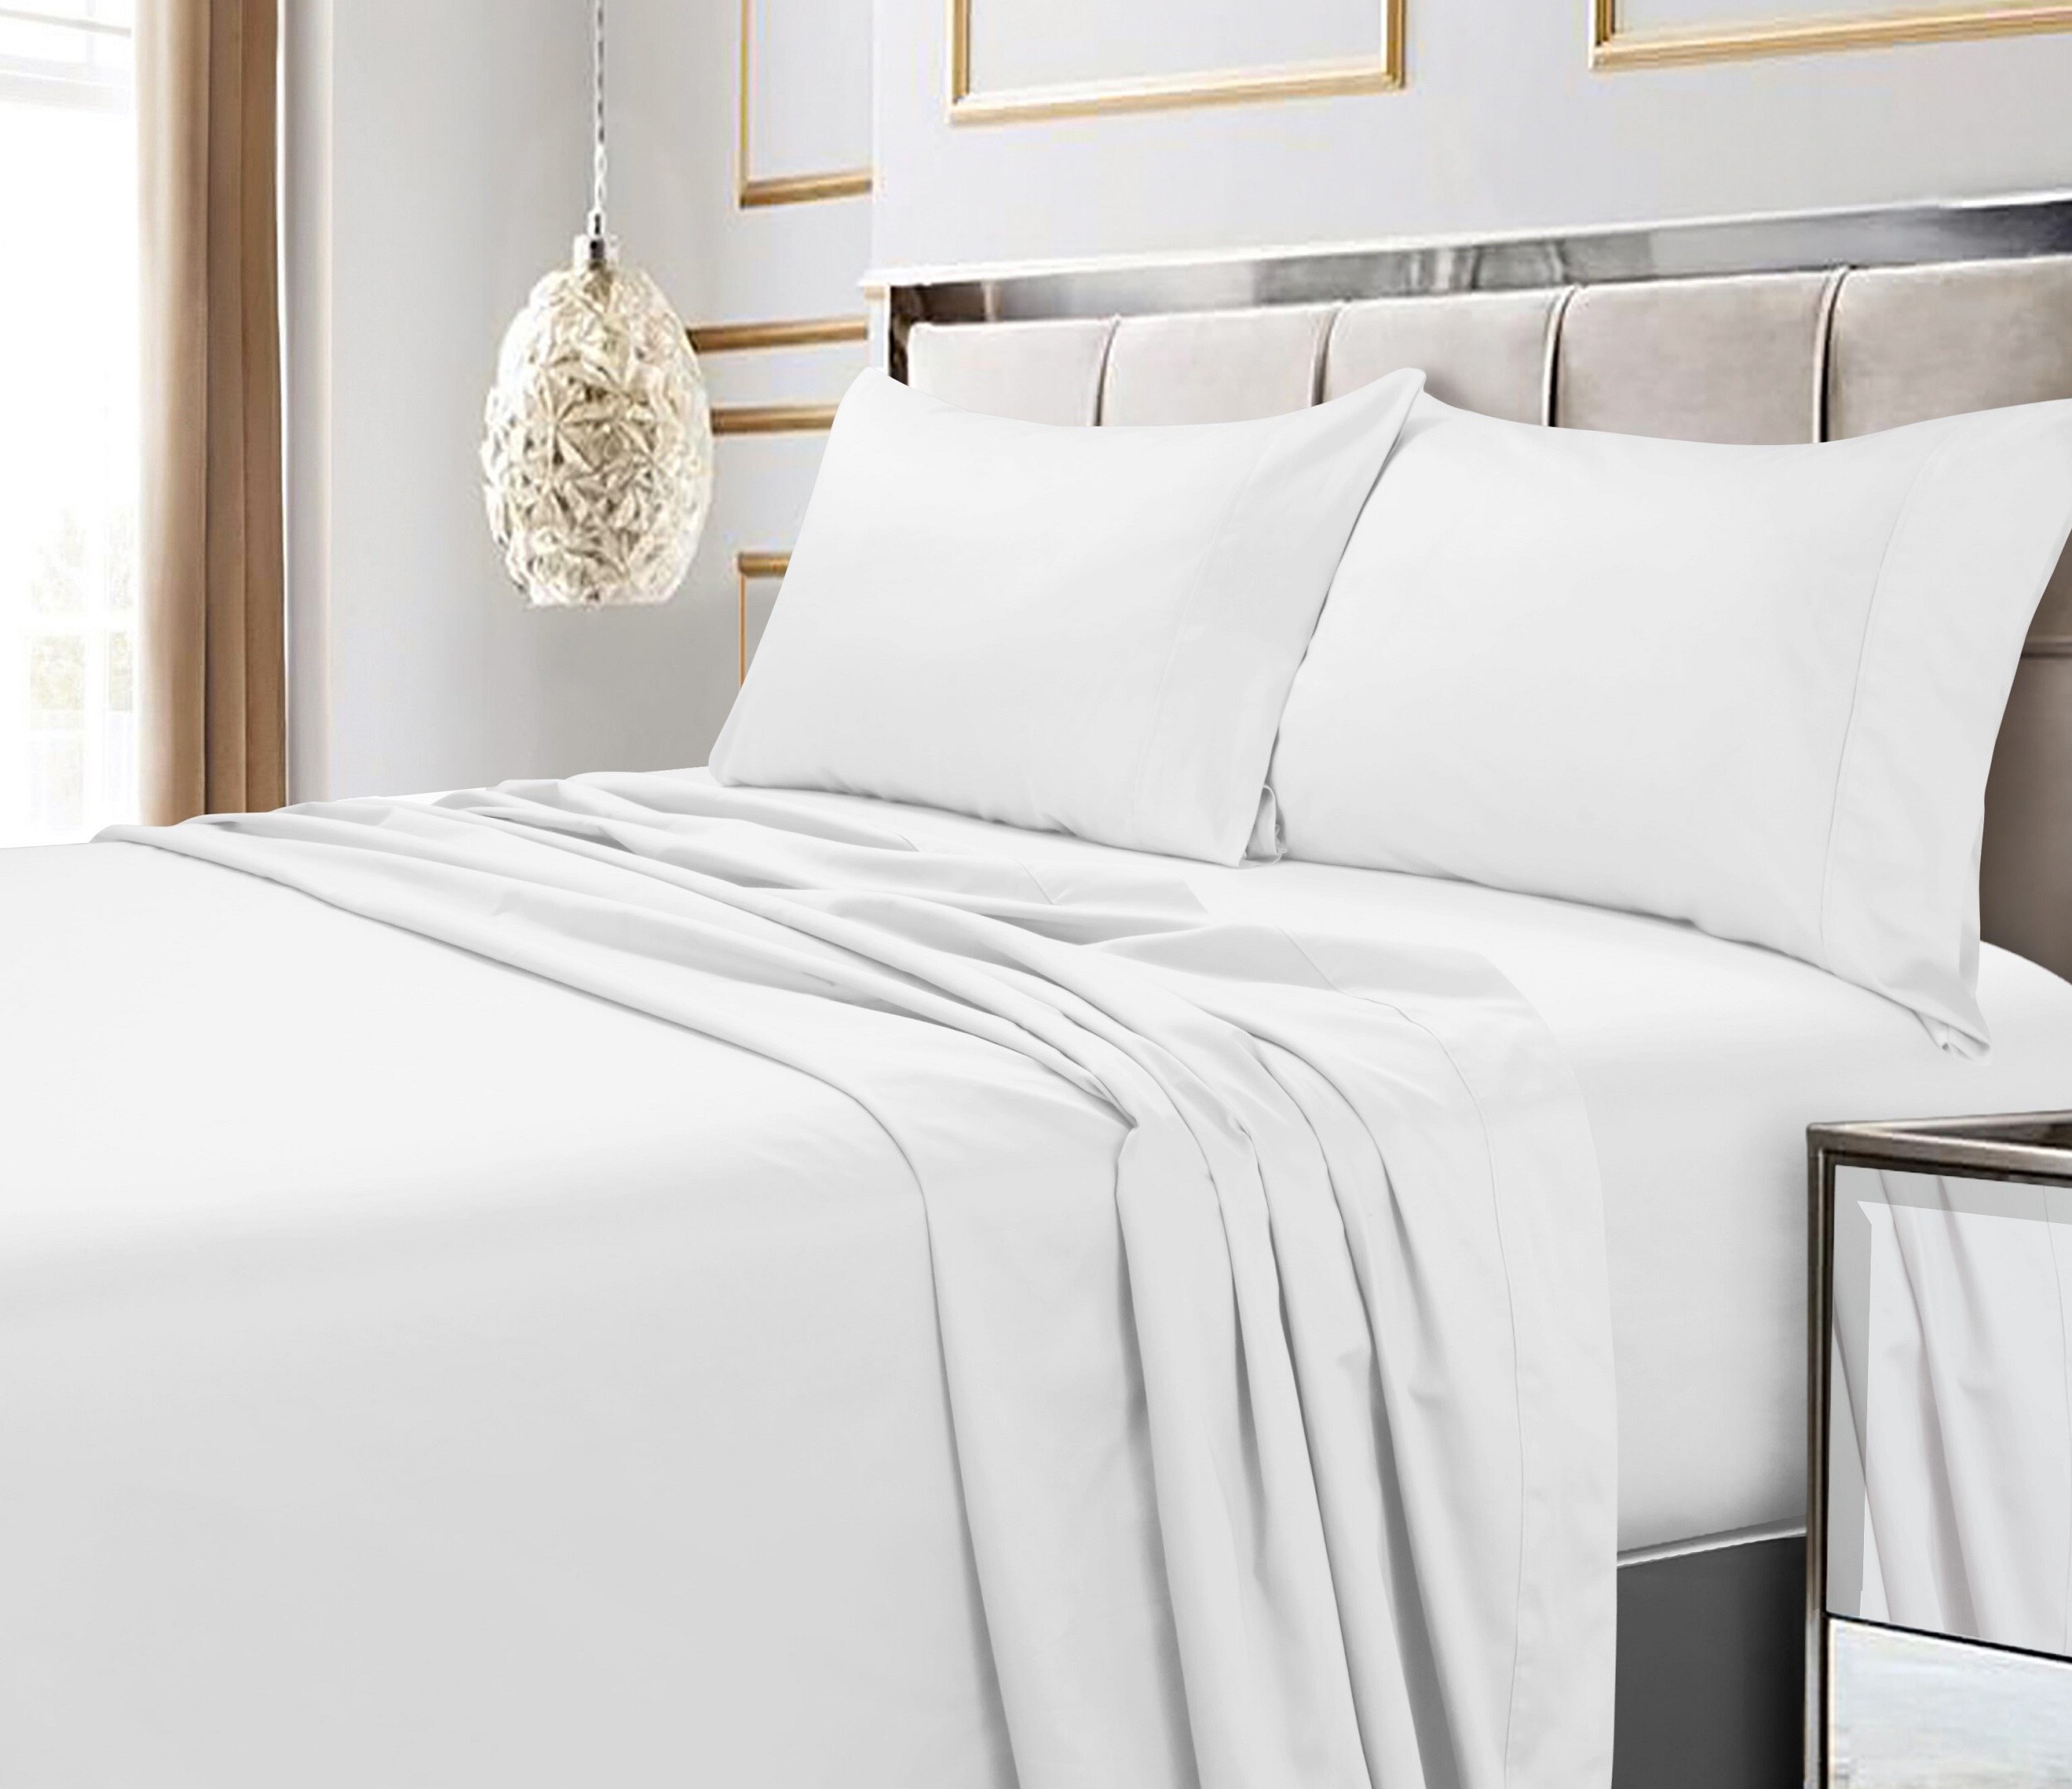 heroïne Prestatie Trekker TRIBECA LIVING 600 TC 4-Piece Sheet Set King 600-Thread-Count Cotton White  Bed-Sheet in the Bed Sheets department at Lowes.com